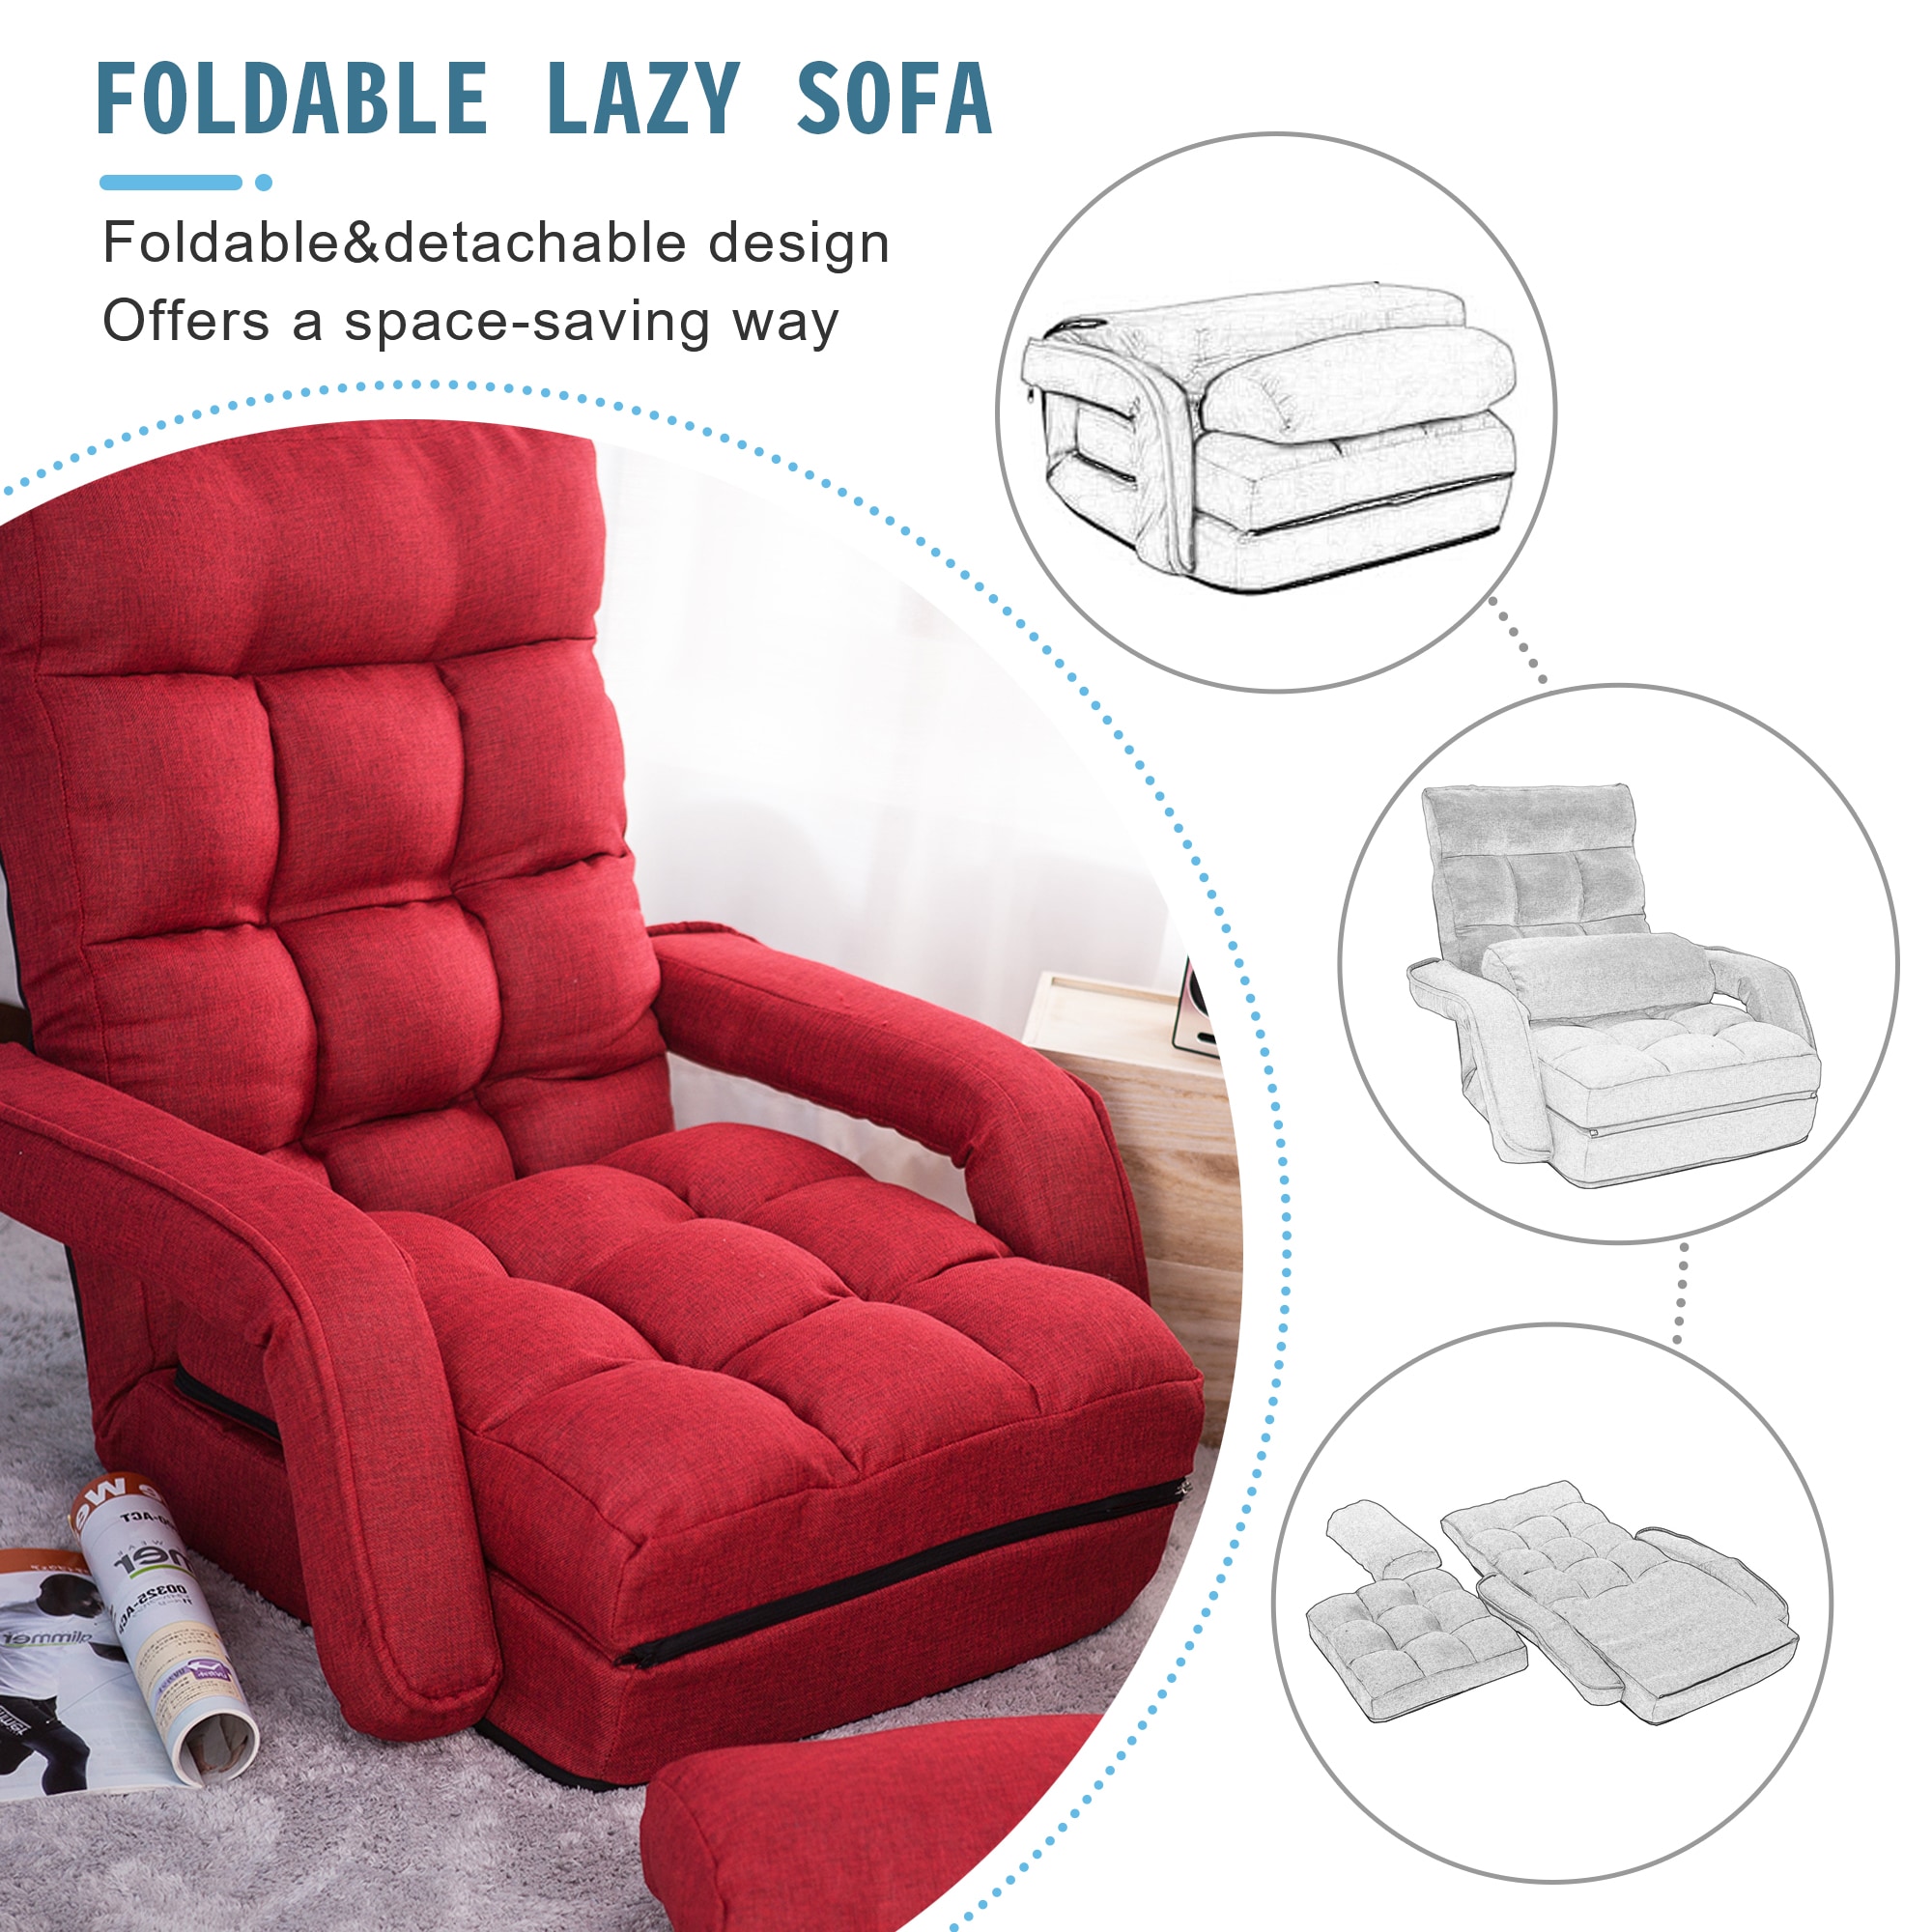 Adjustable Folding Lazy Floor Chair Sofa Lounger Bed with Armrests and a Pillow 